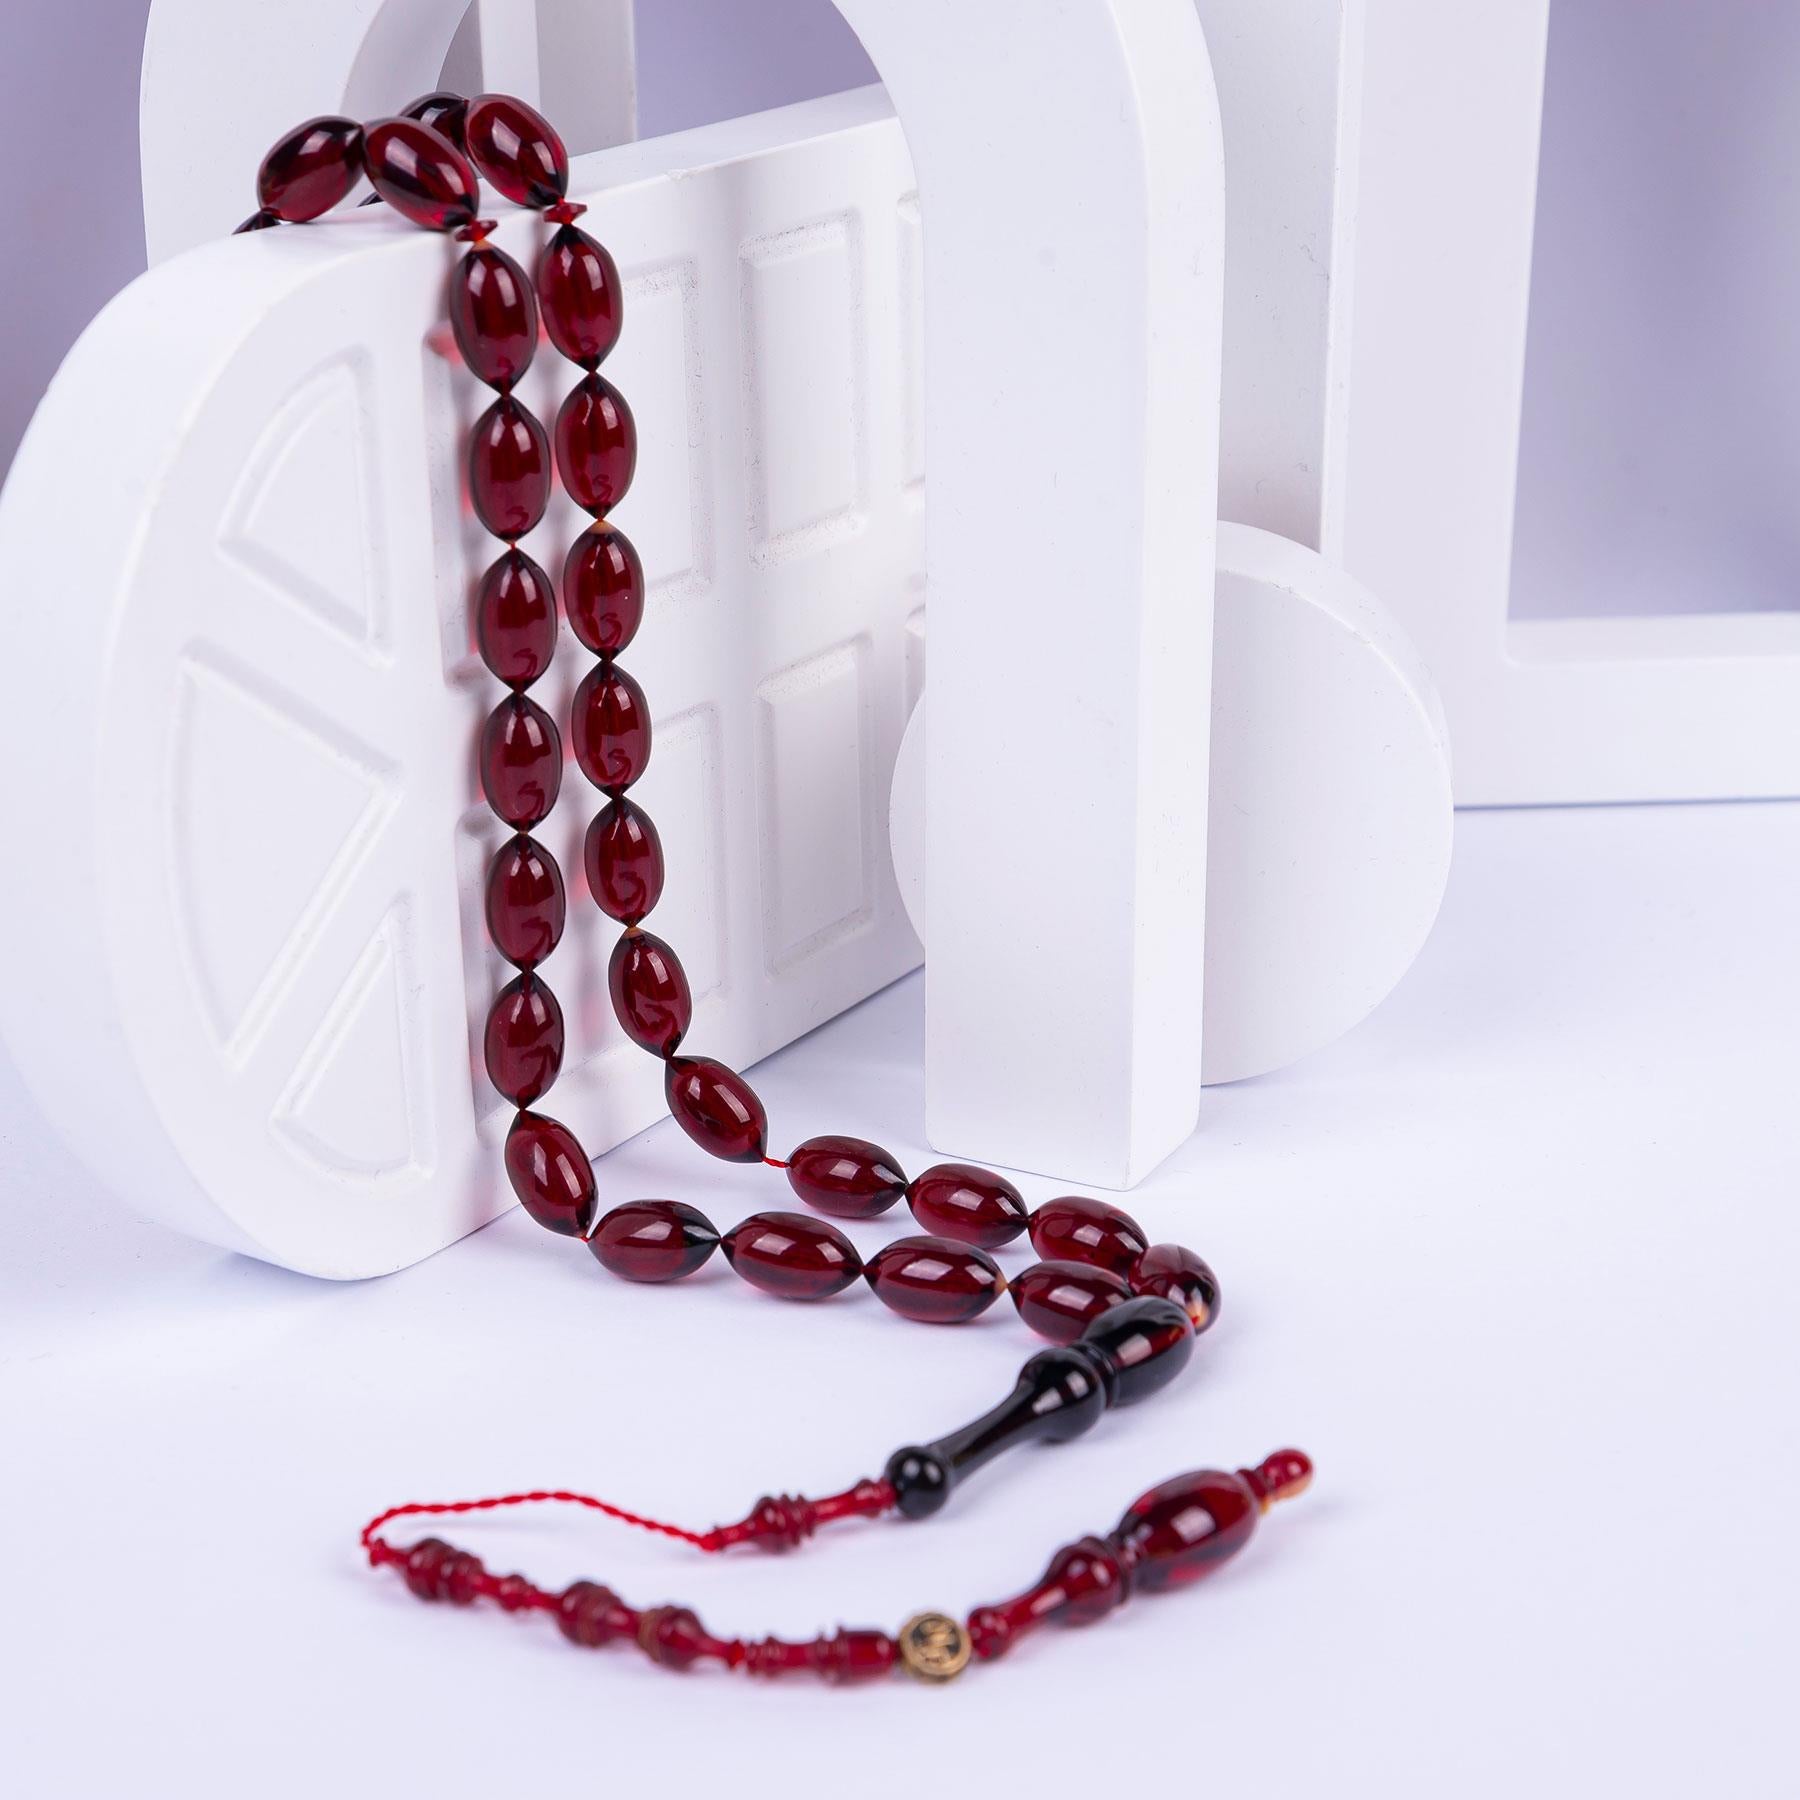 Ve Tesbih Systematic Solid Model Pressed Amber Prayer Beads 1